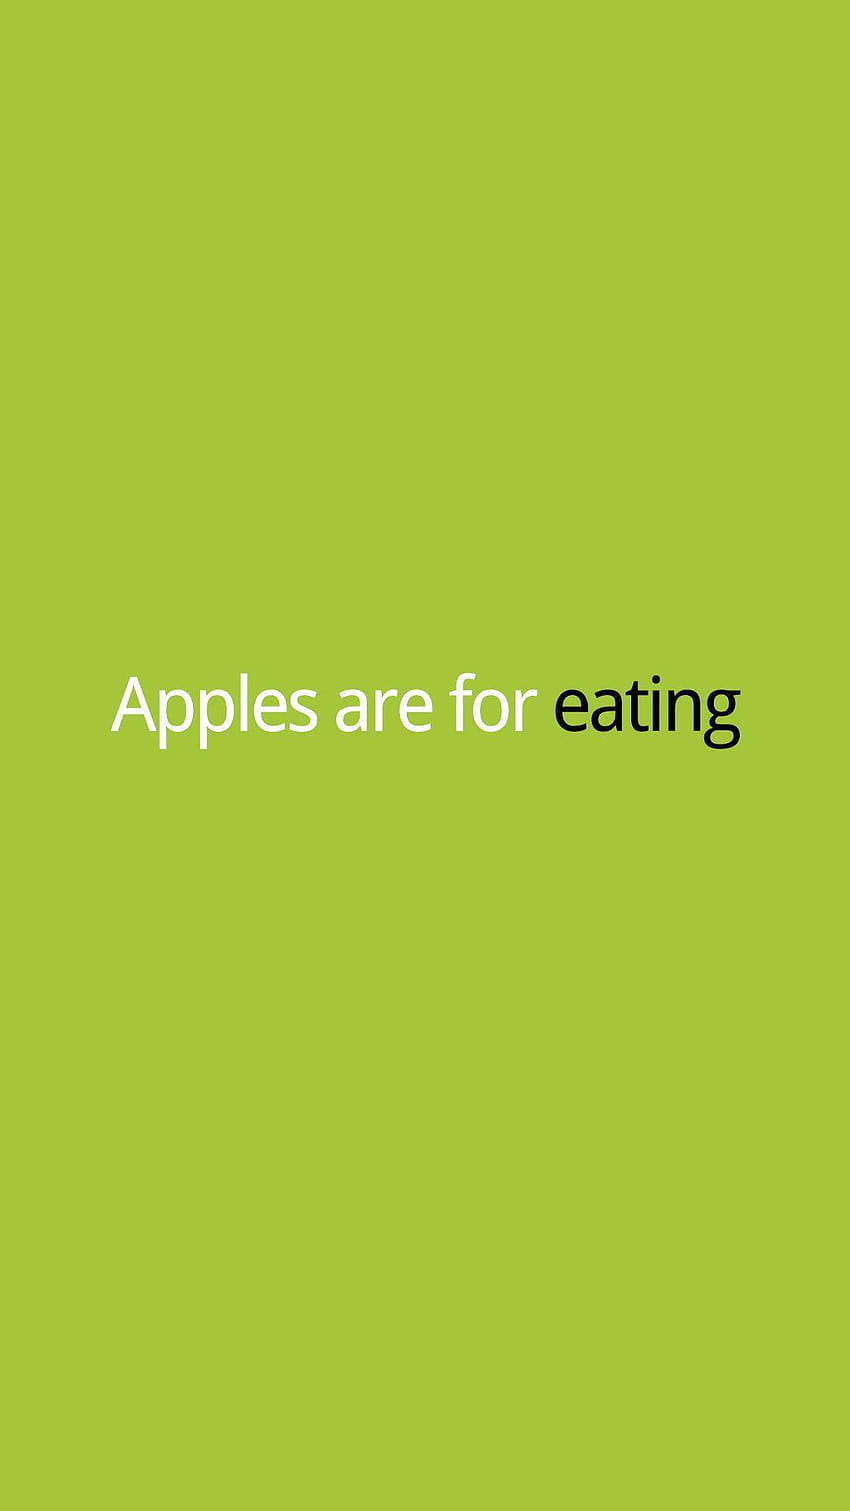 Android eating apple HD phone wallpaper